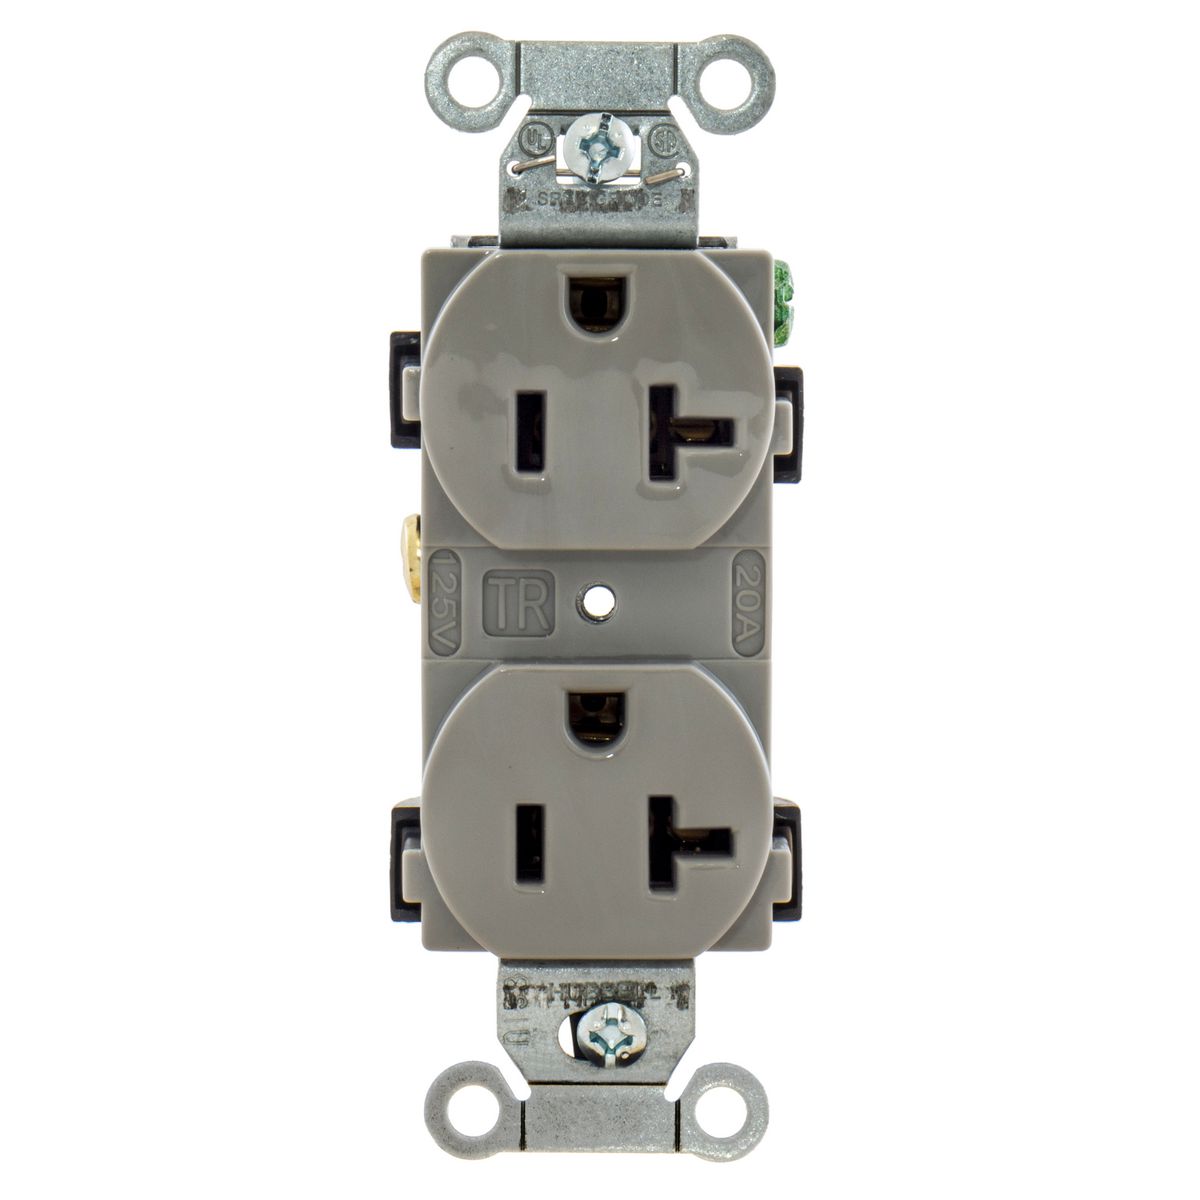 HUBBELL DUPLEX RECEPTACLE-CR20GRY 20 AMP 125V 2 POLE 3 WIRE. QTY-1 K 